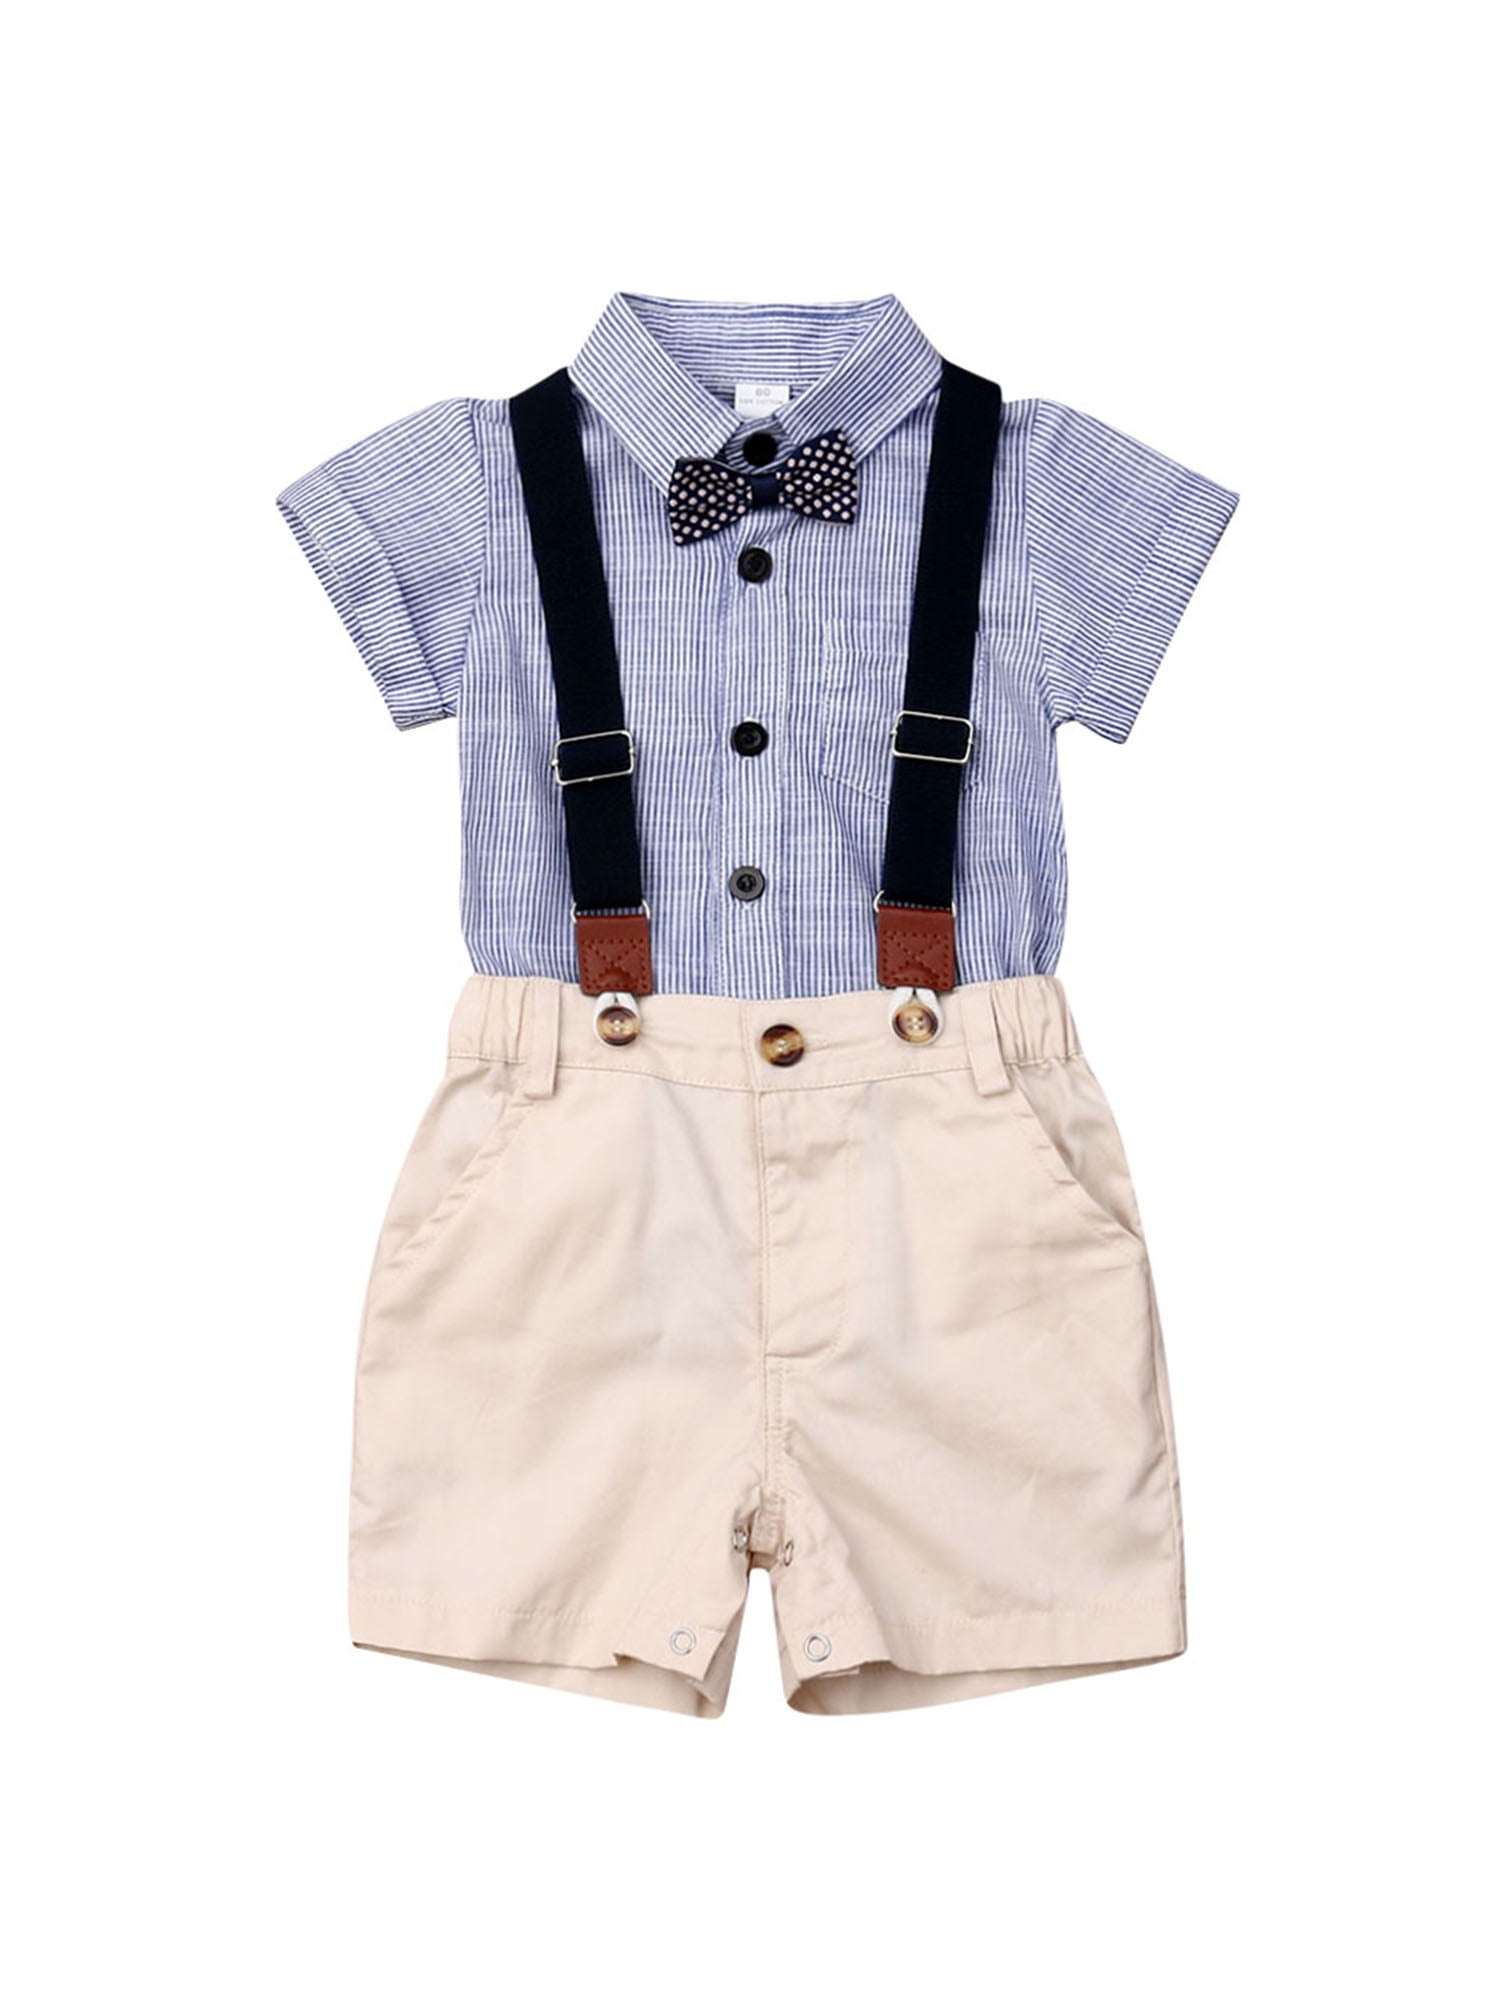 Infant Baby Boys Gentleman Bow Tie Romper Shirt+Shorts Overalls Outfits Clothes 